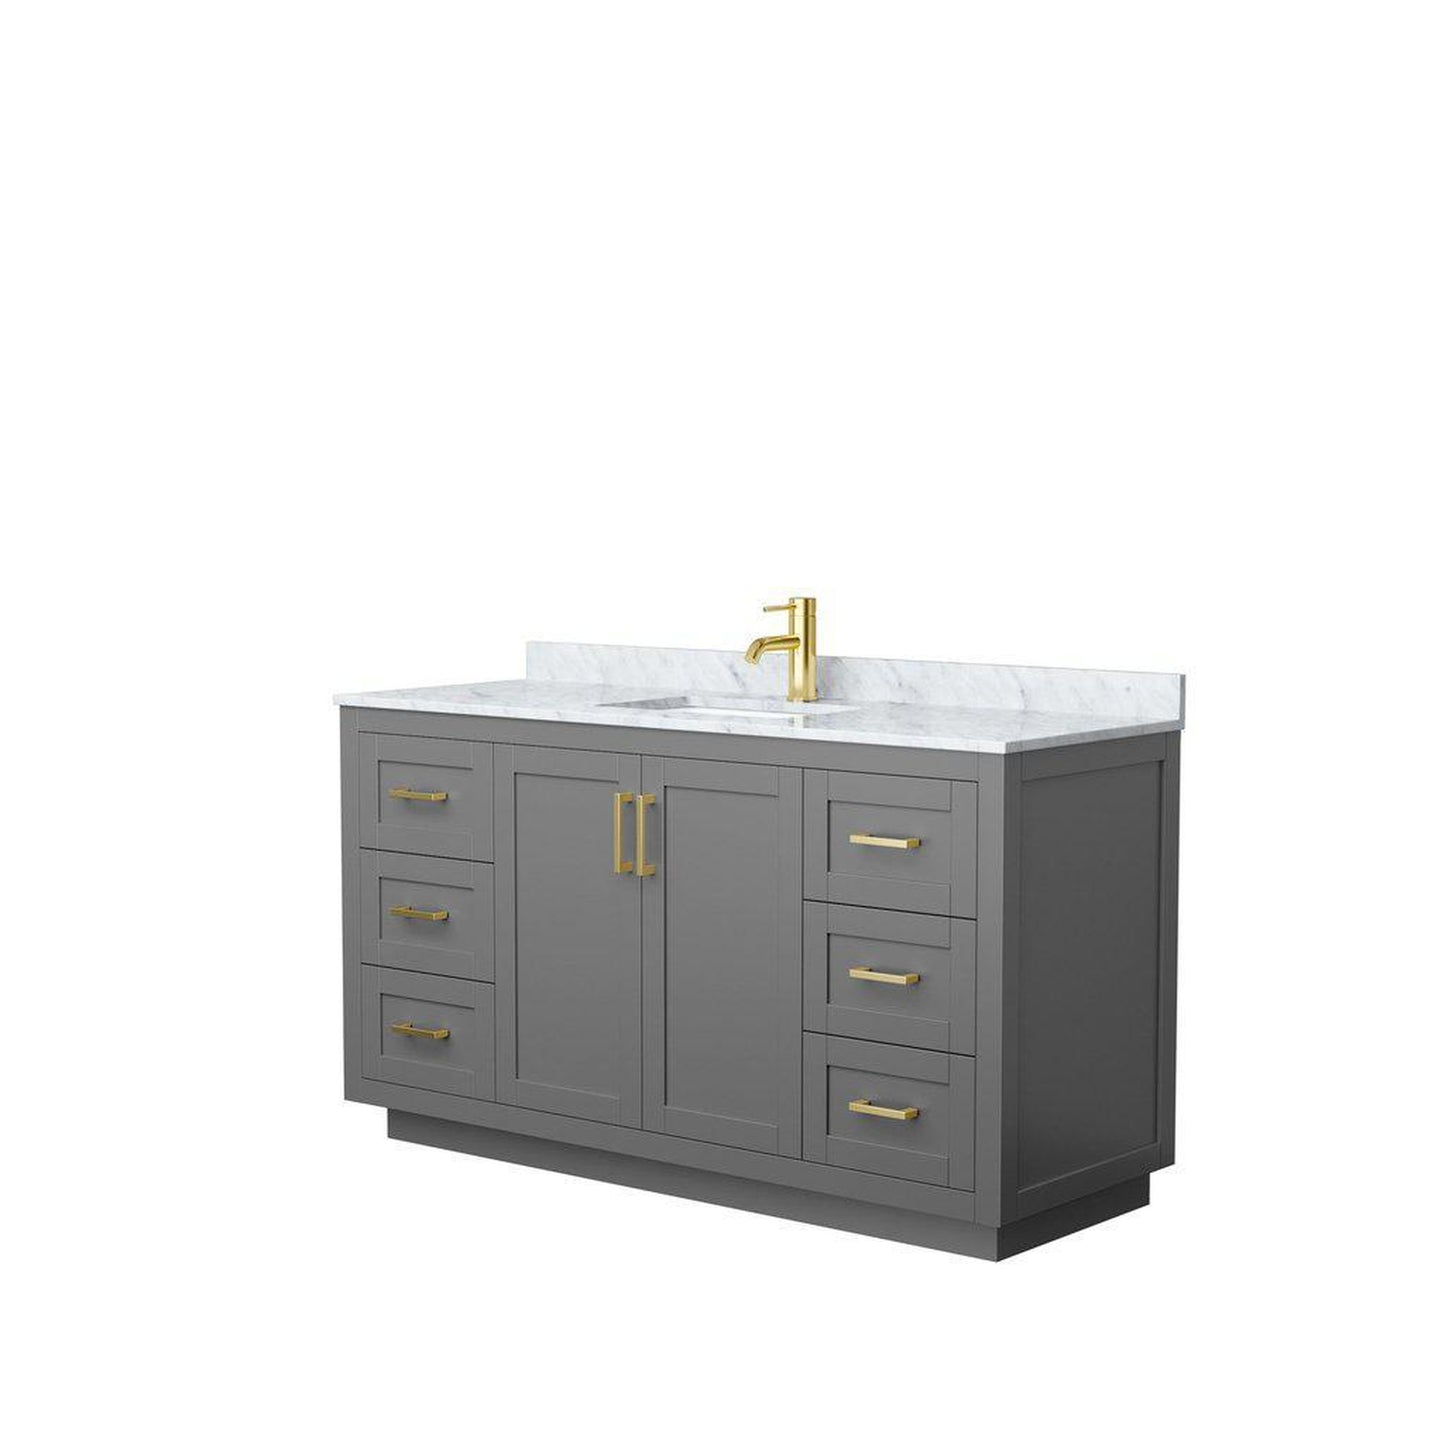 Wyndham Collection Miranda 60" Single Bathroom Dark Gray Vanity Set With White Carrara Marble Countertop, Undermount Square Sink, And Brushed Gold Trim